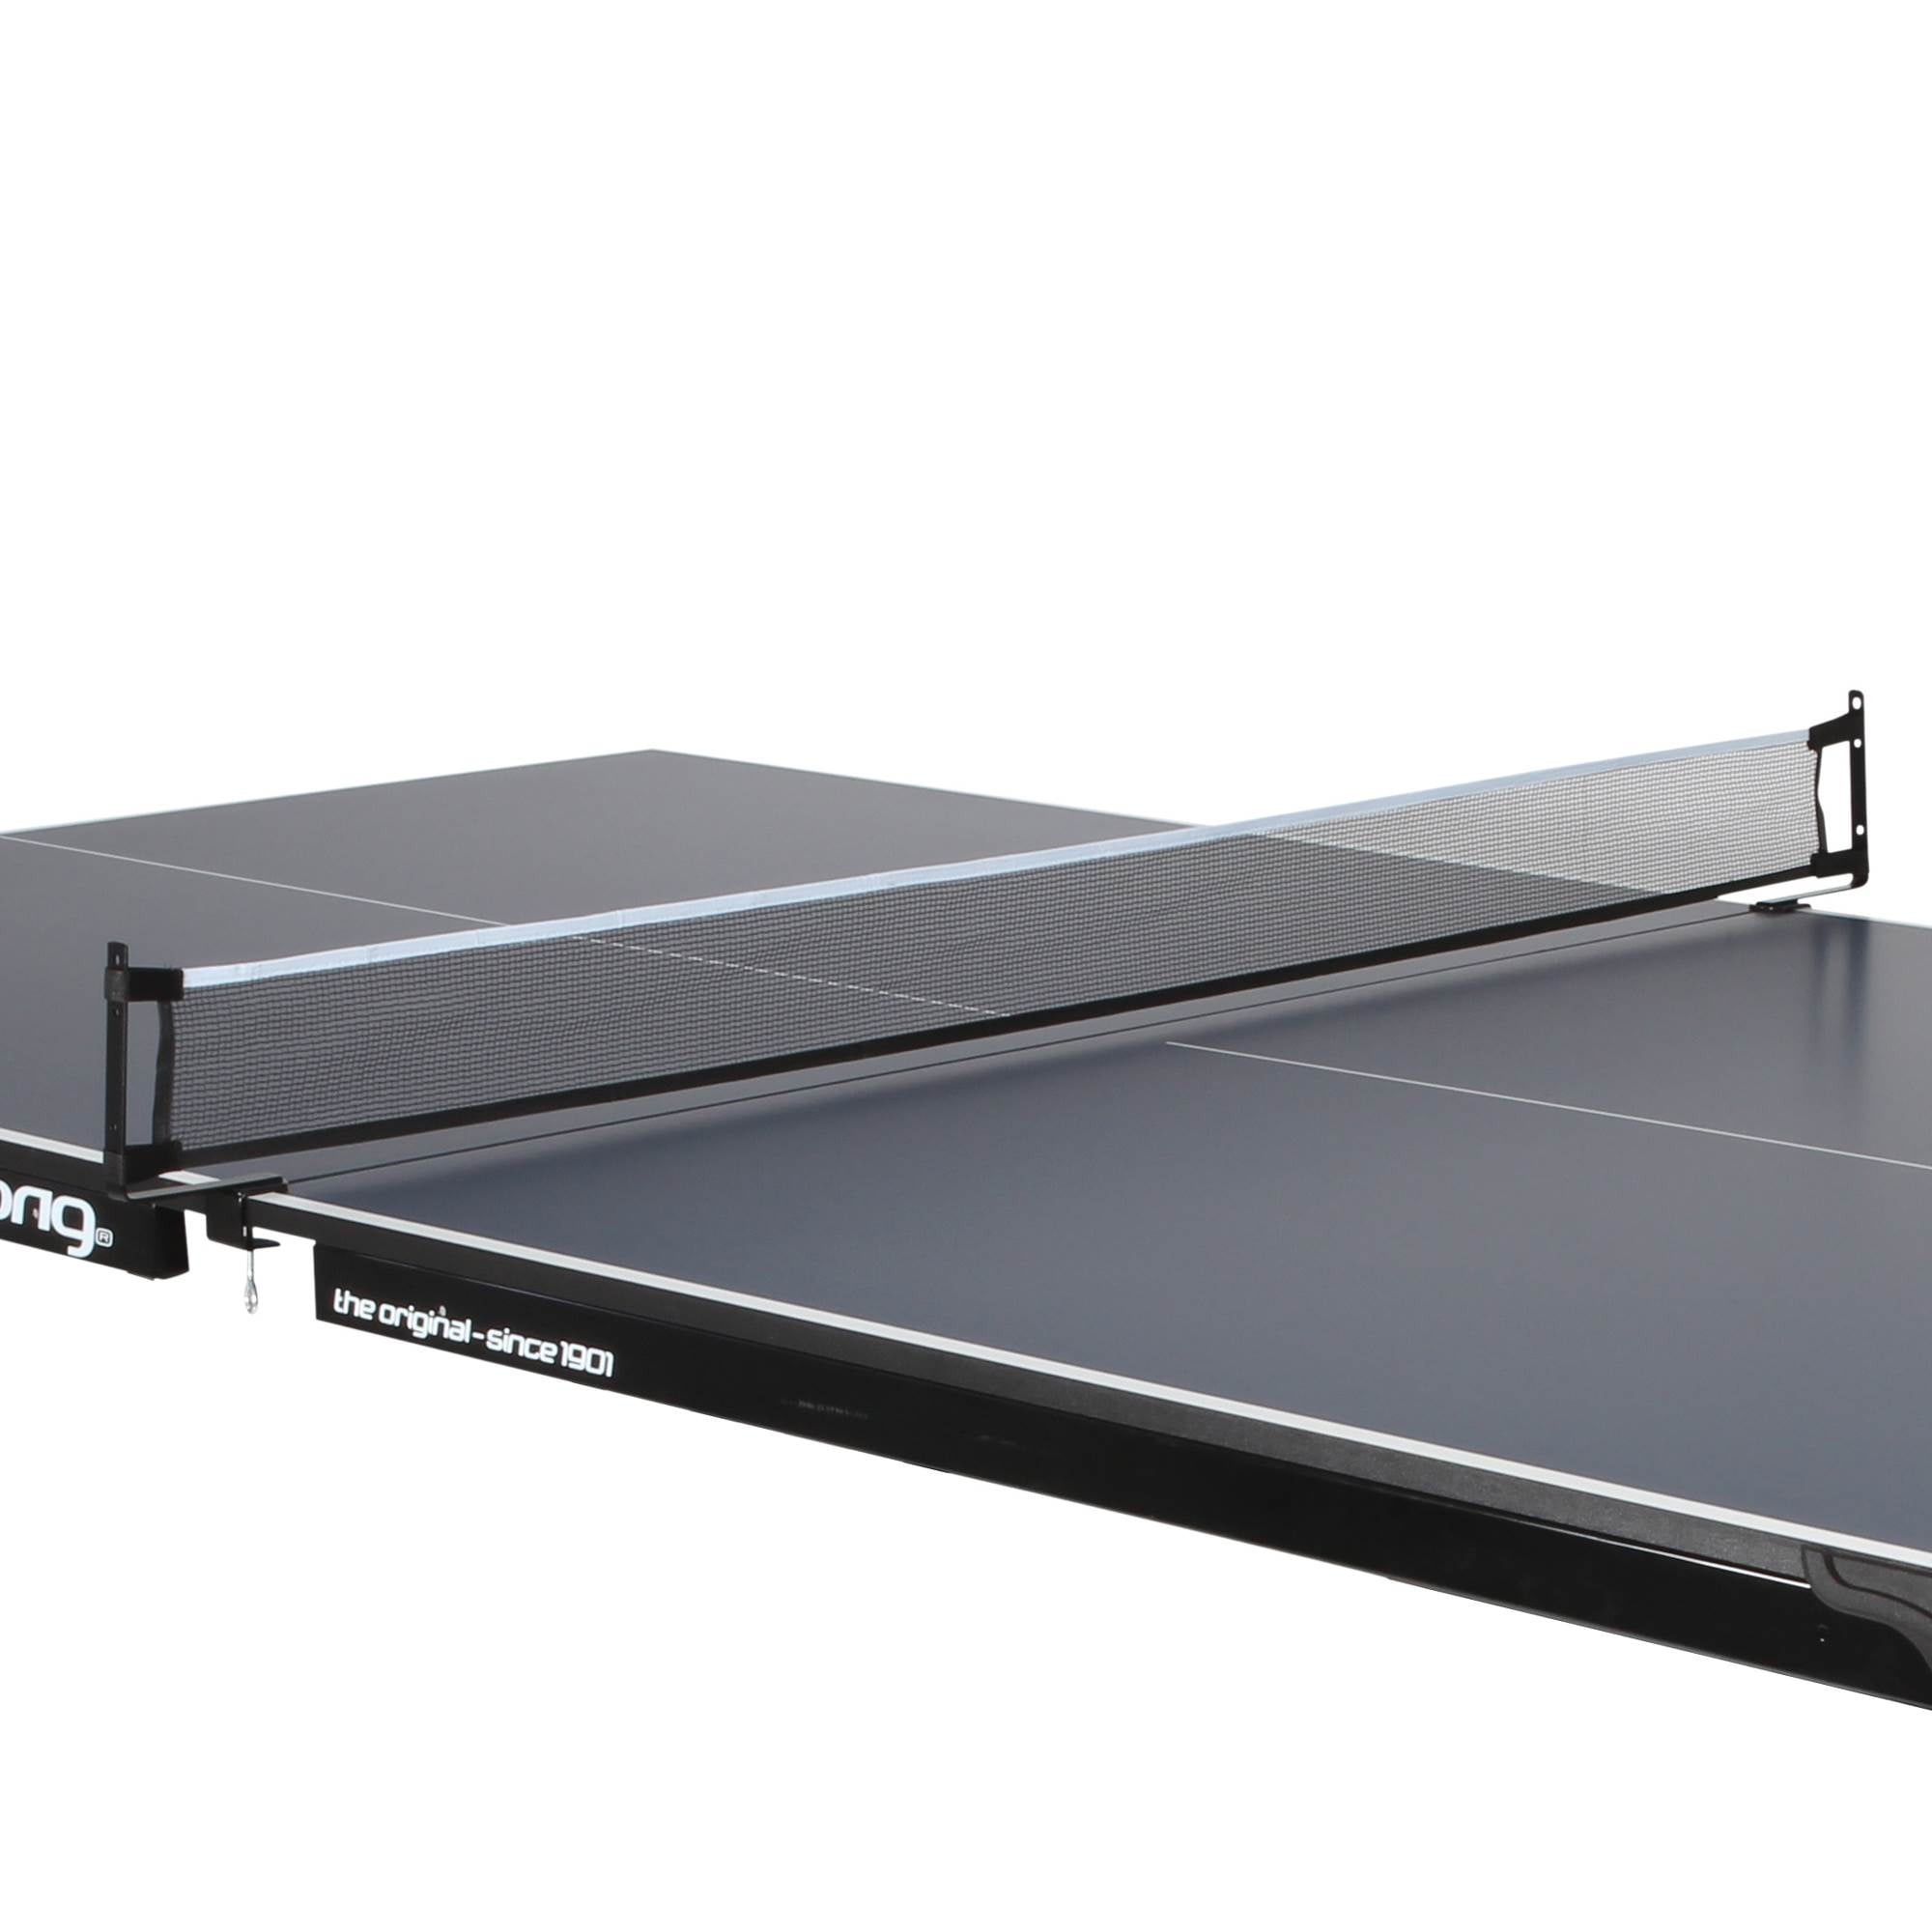 Ping Pong Fury Regulation Size Tennis Table W/ 4 Rackets and 6 Ping Po –  Tuesday Morning